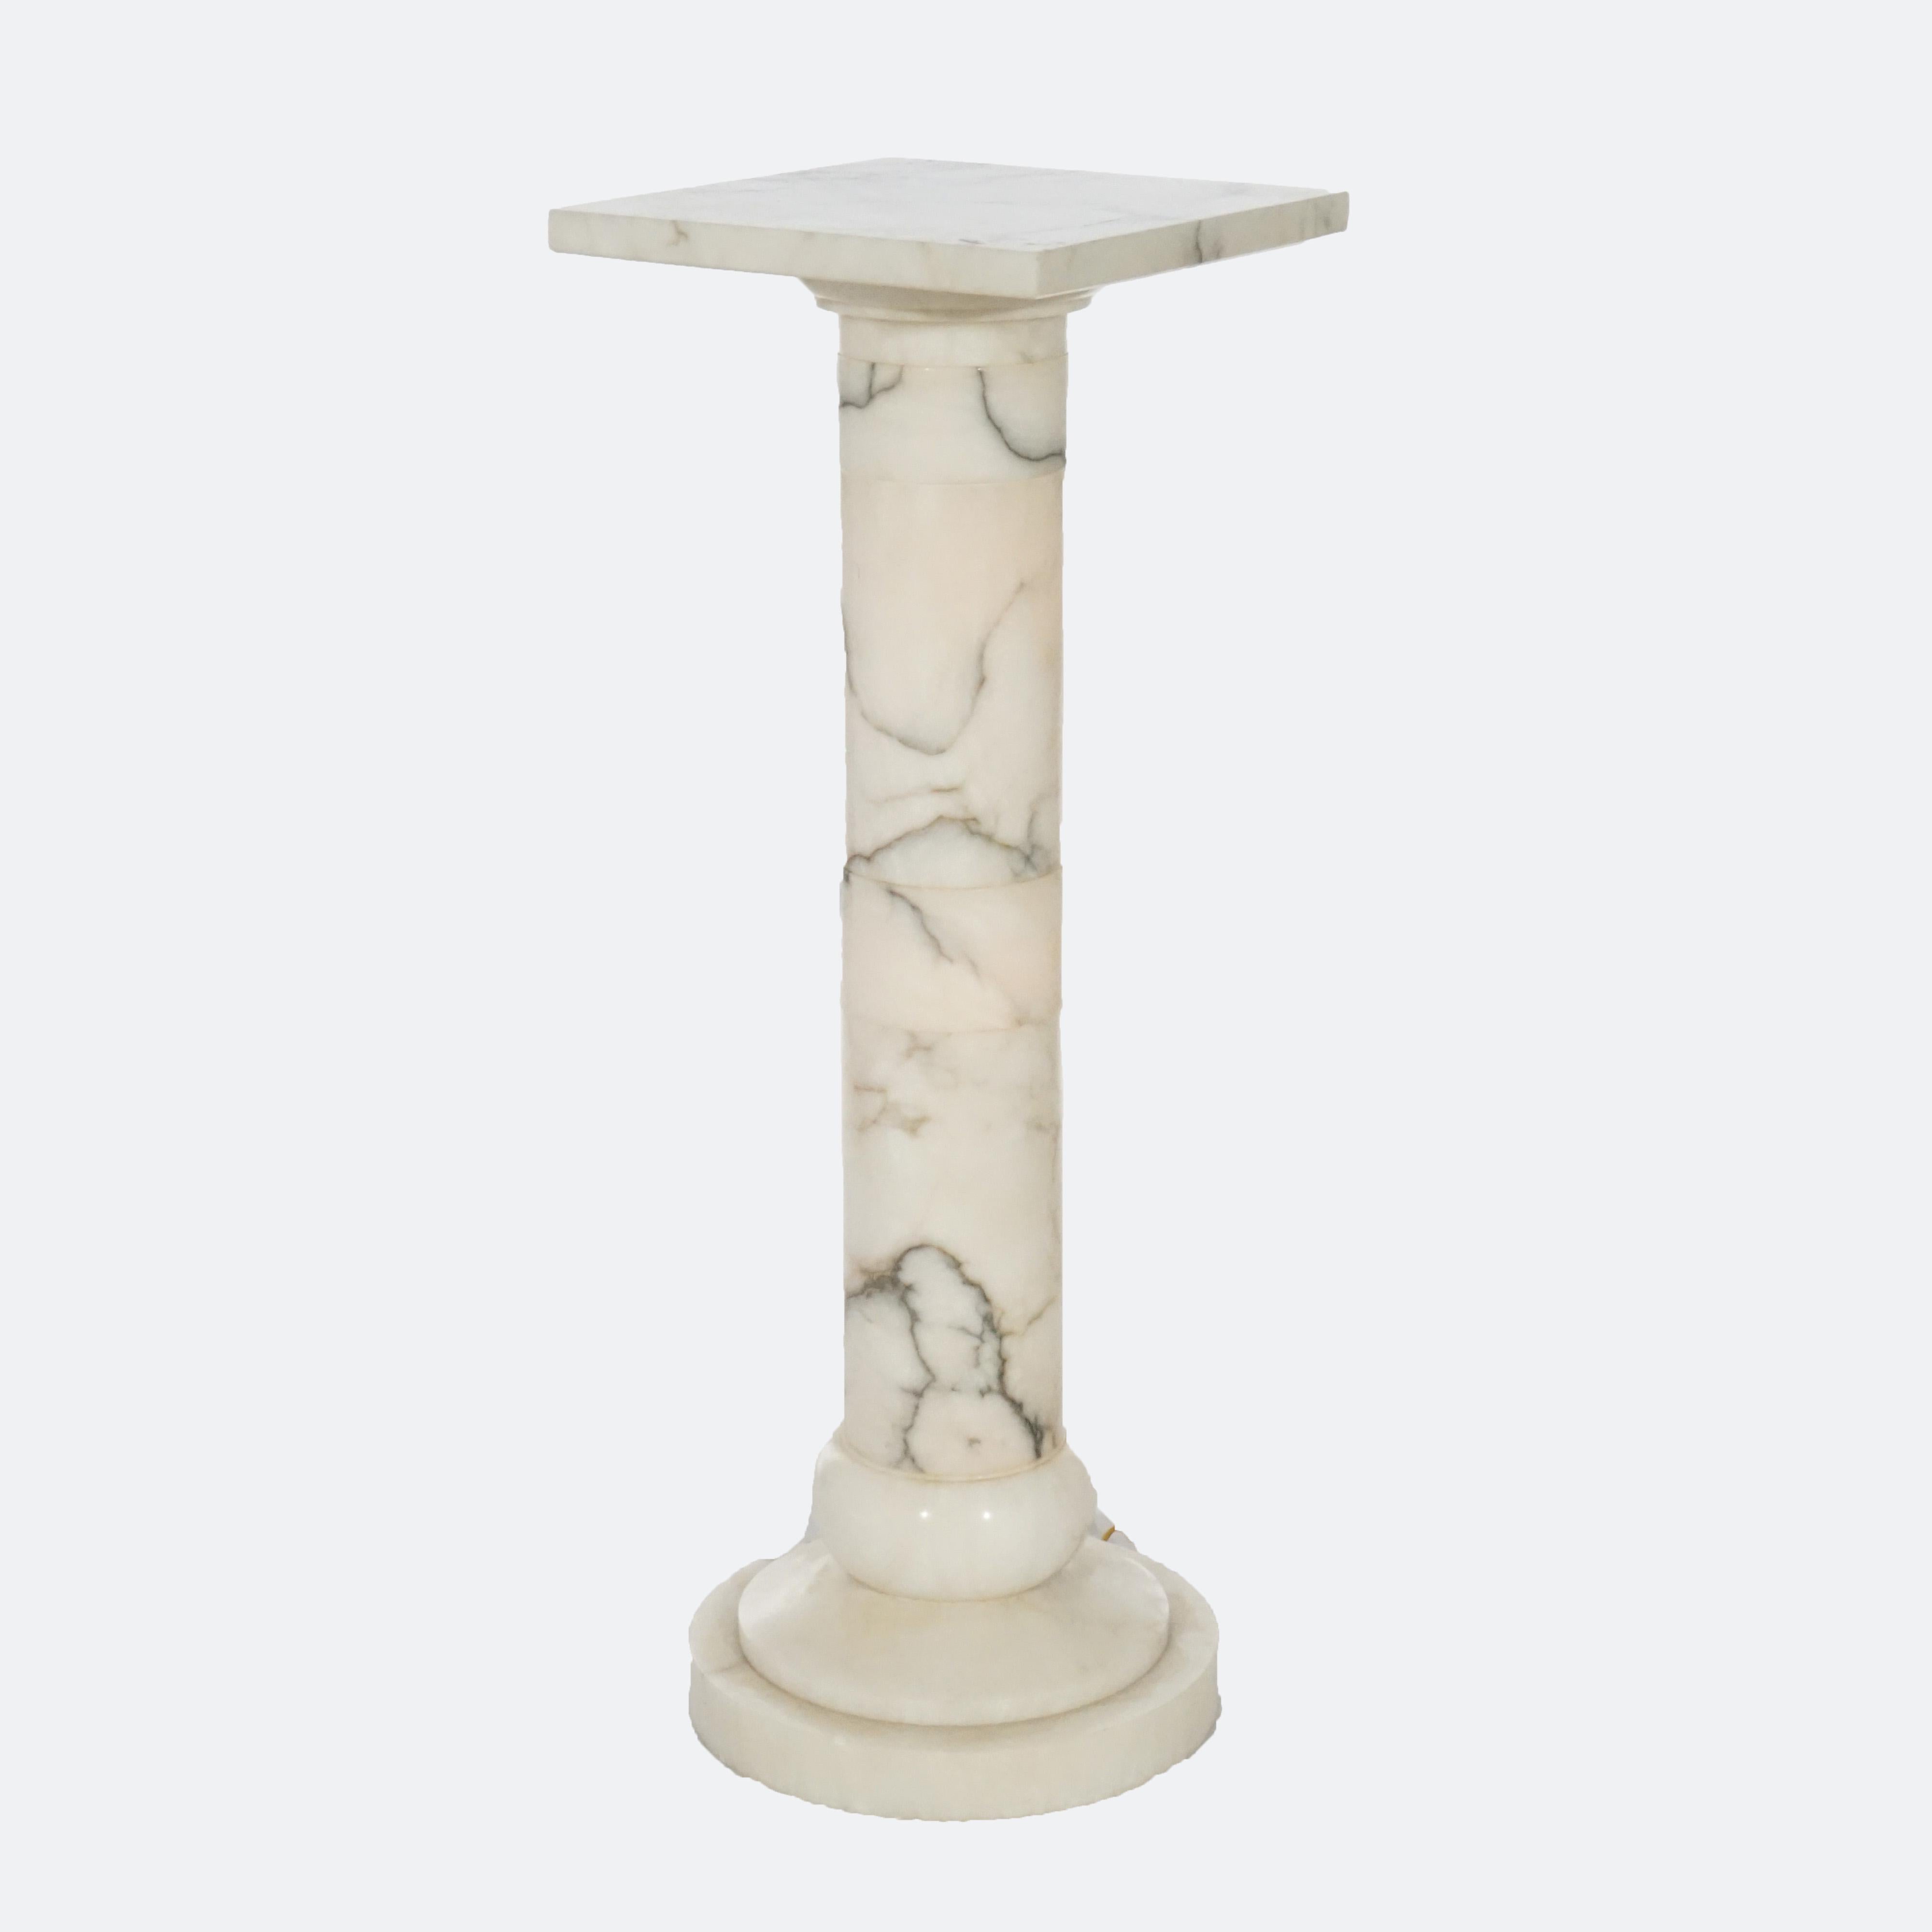 An antique Greek Classical sculpture pedestal offers marble construction in Doric column form with square display over lighted column, c1890

Measures- 33''H x 11.5''W x 11.5''D

*Ask about DISCOUNTED DELIVERY rates within 1,500 miles of NY*